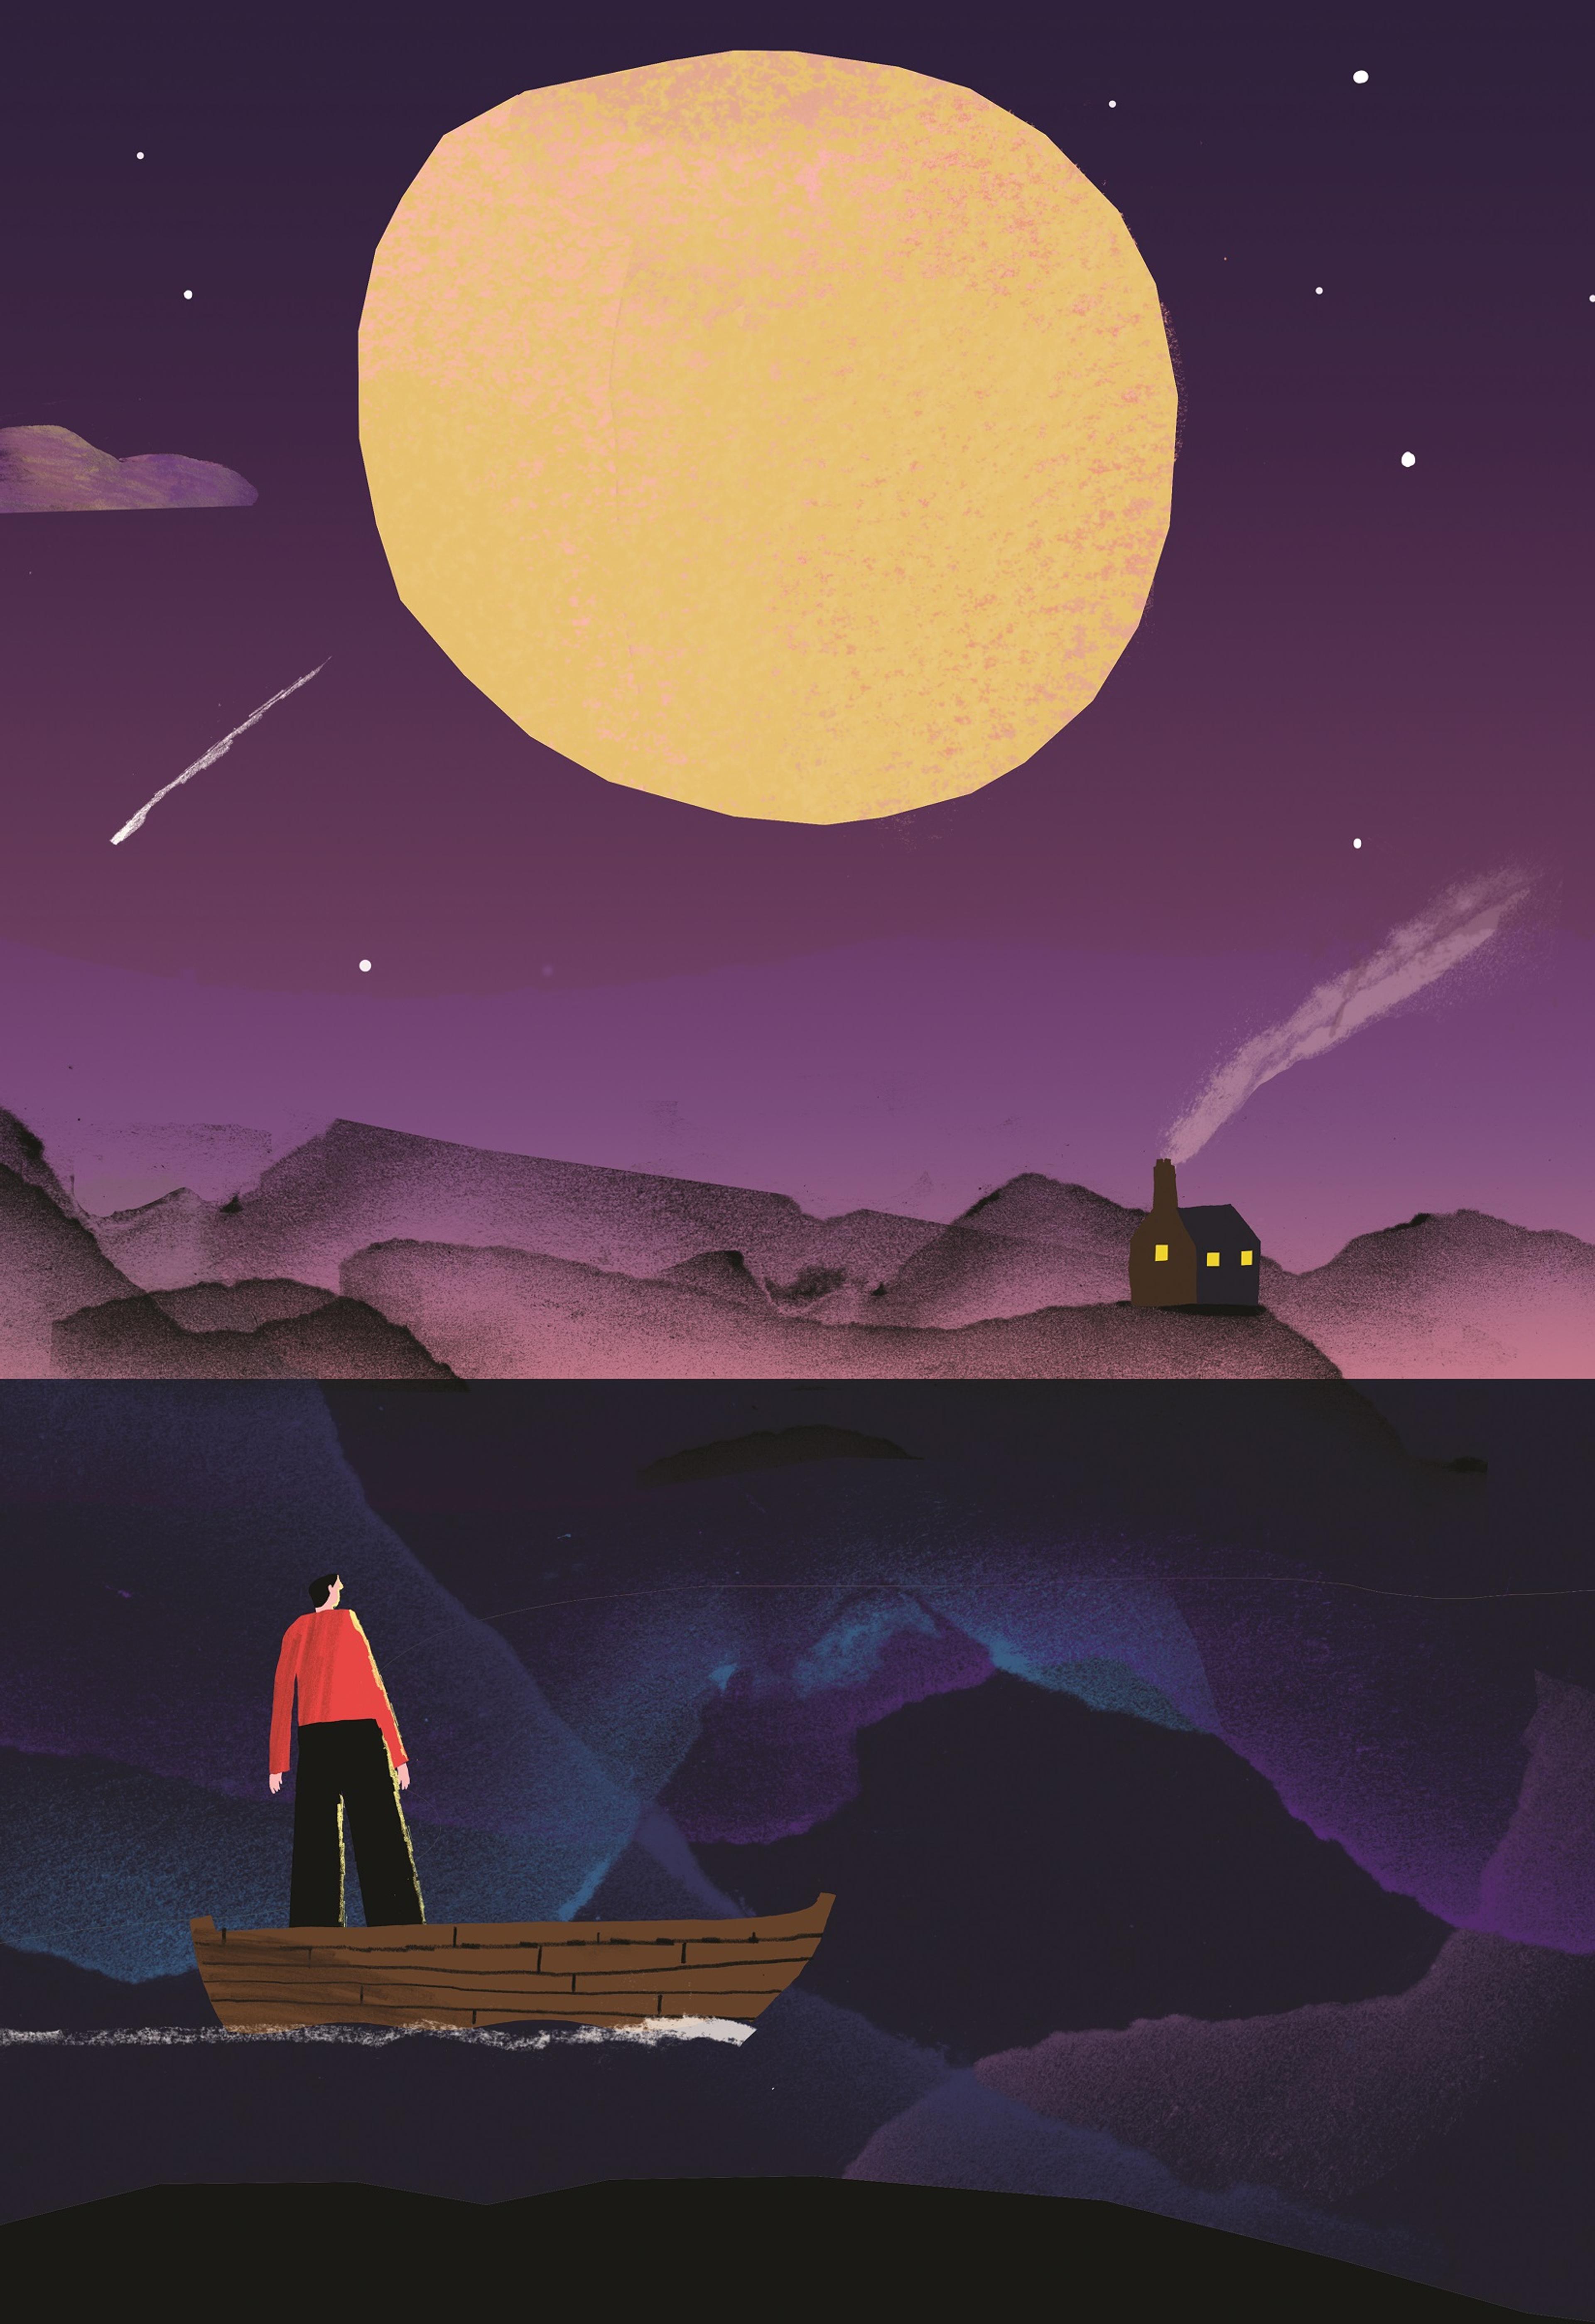 Illustration of a person in a boat looking onto a house in the distance under the moonlight